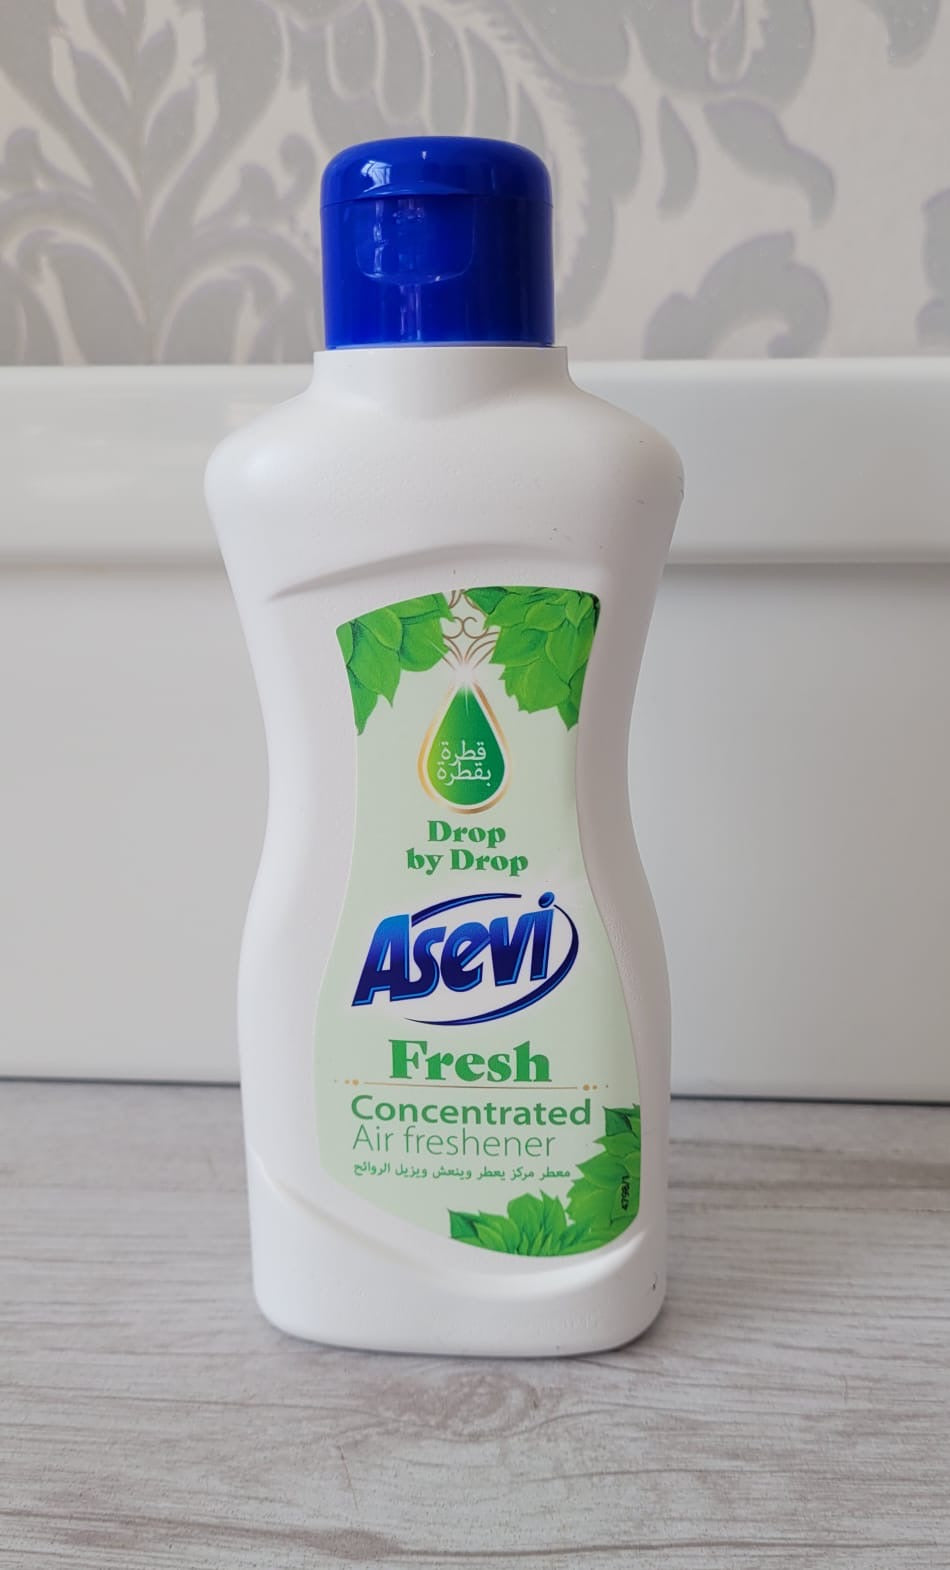 Asevi concentrated air freshener drops